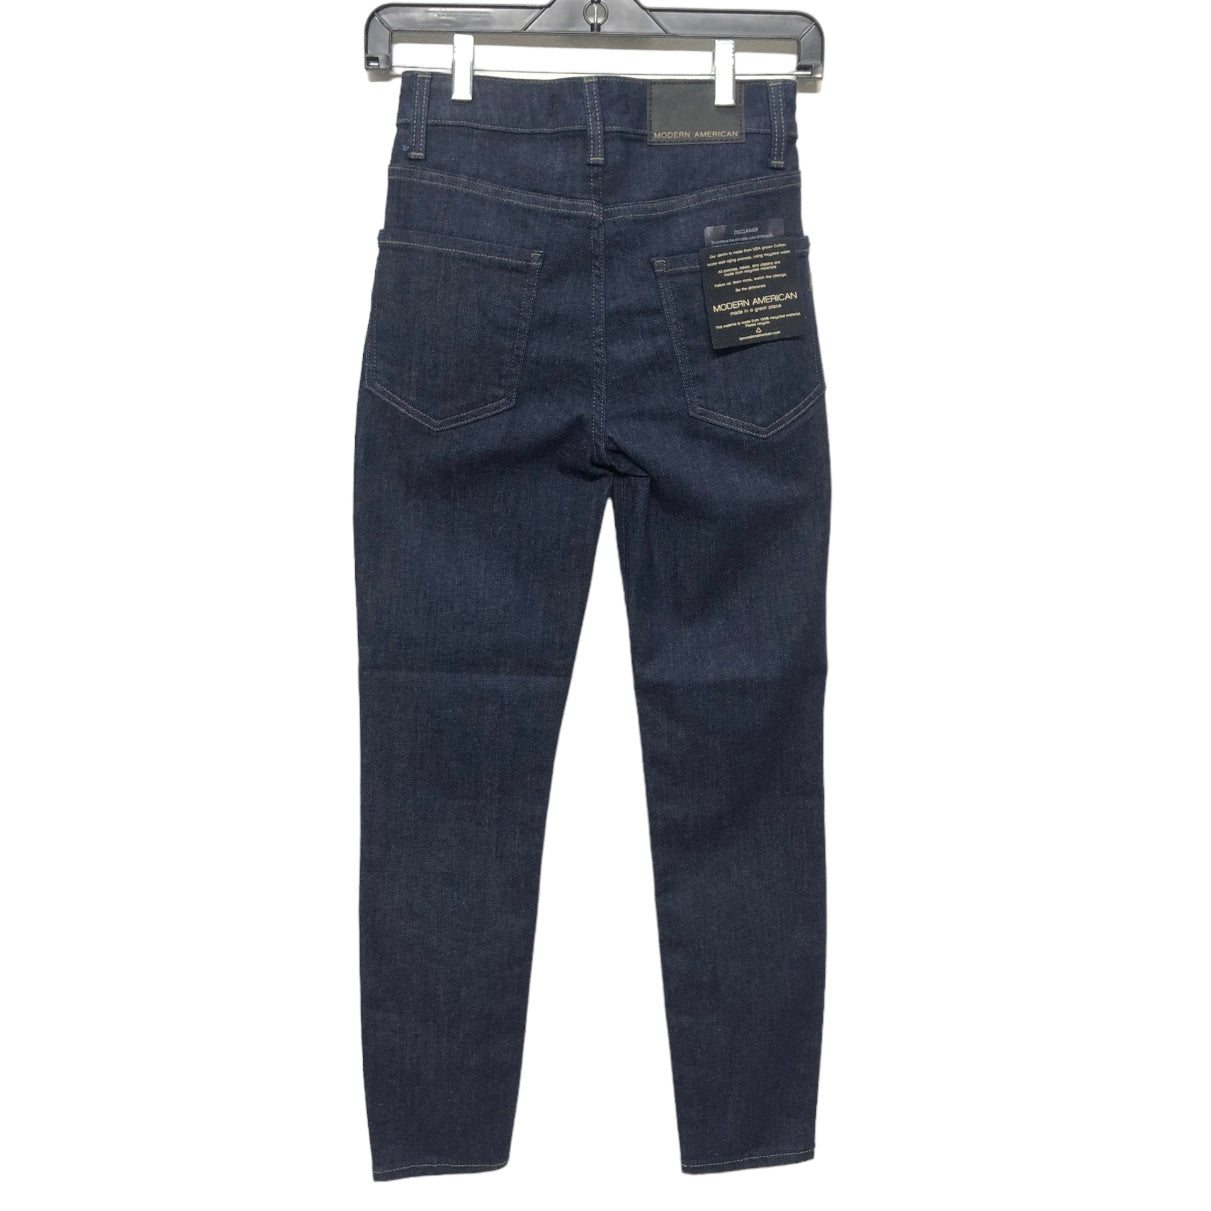 Jeans Cropped By Modern American  Size: 0